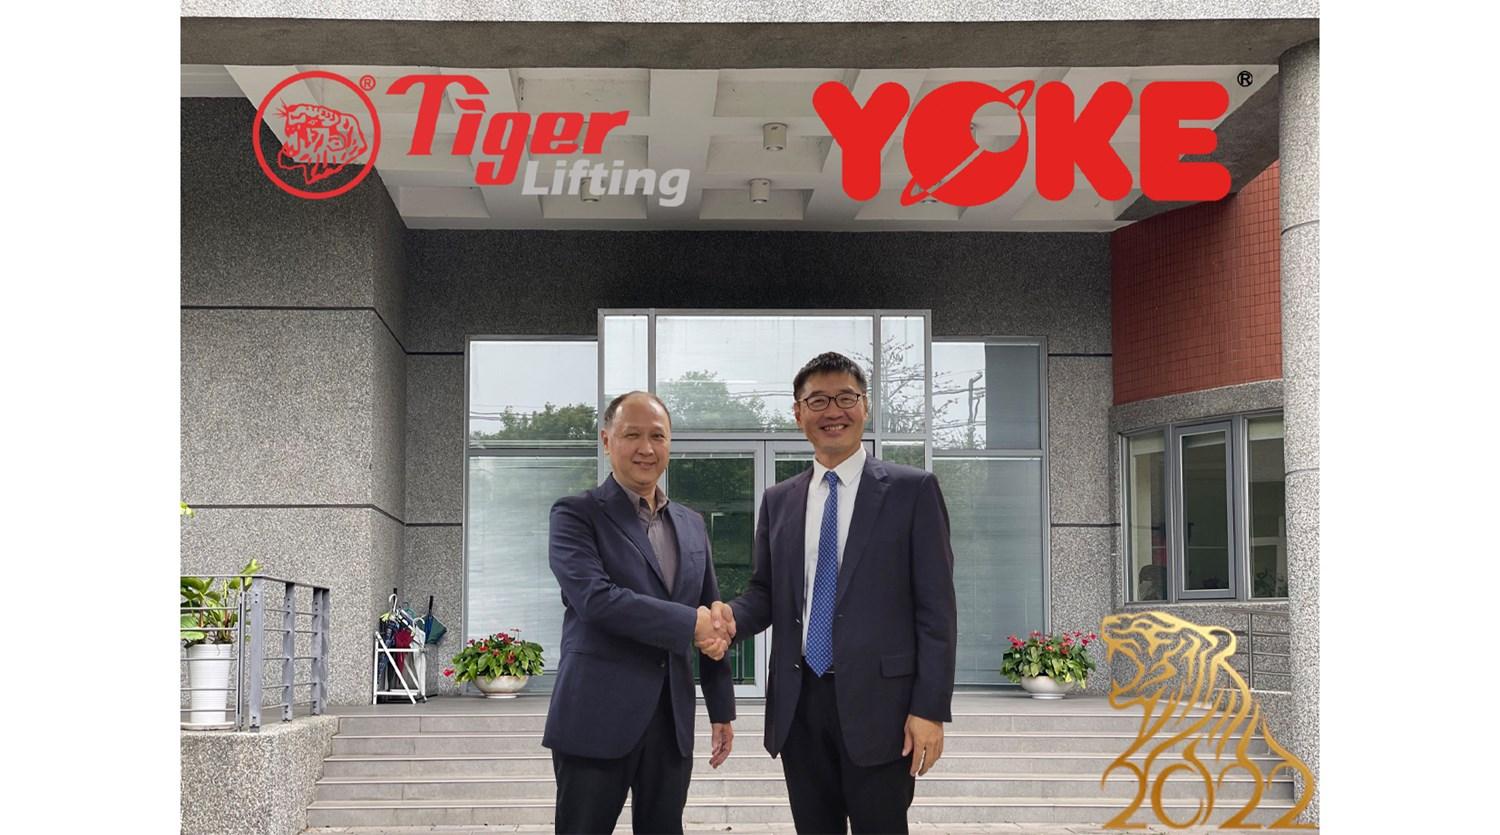 Product Tiger is to be a distributor of the YOKE digital products in the UK - Tiger Lifting image